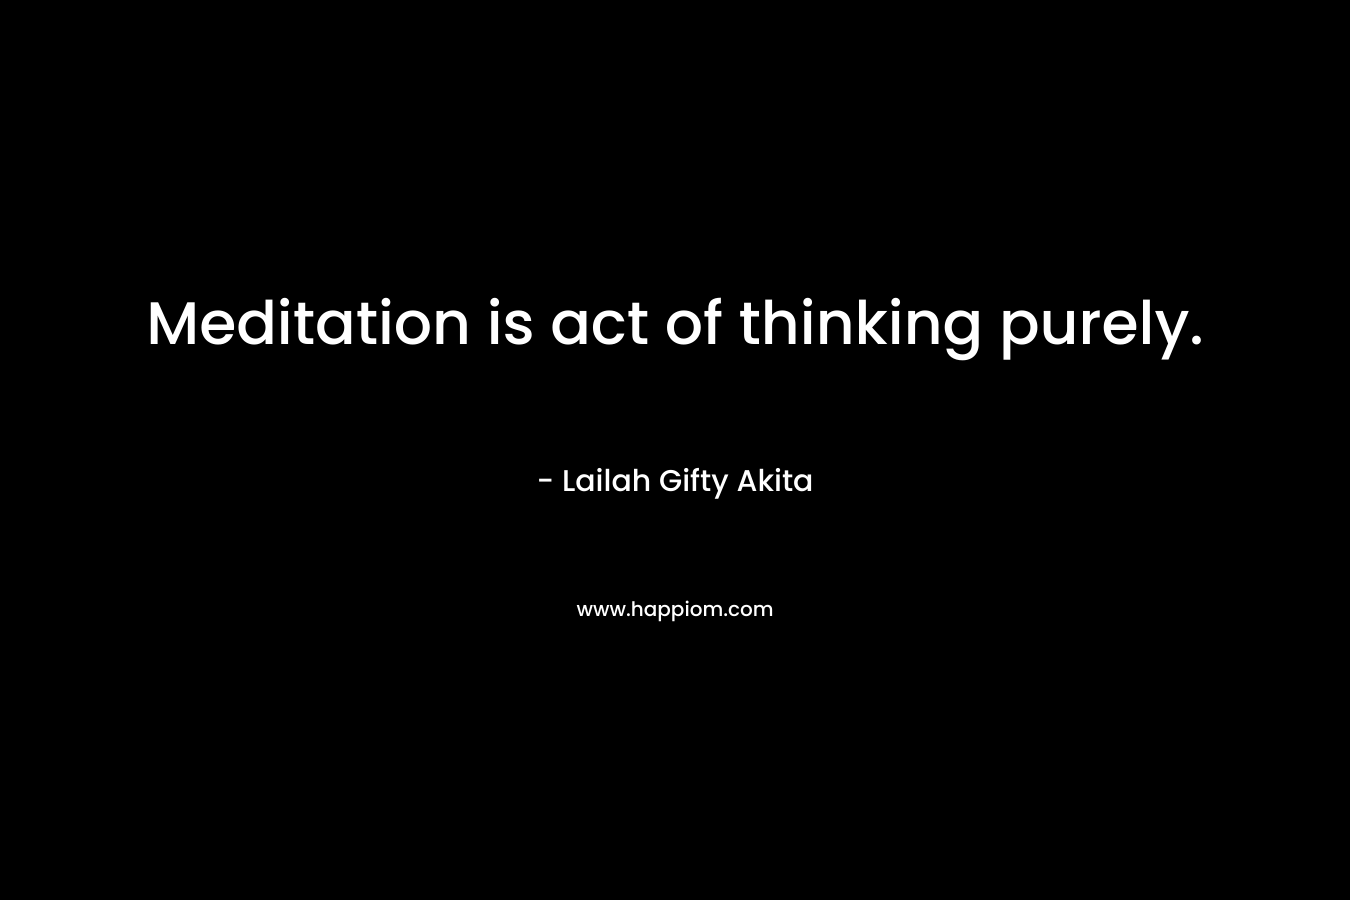 Meditation is act of thinking purely.